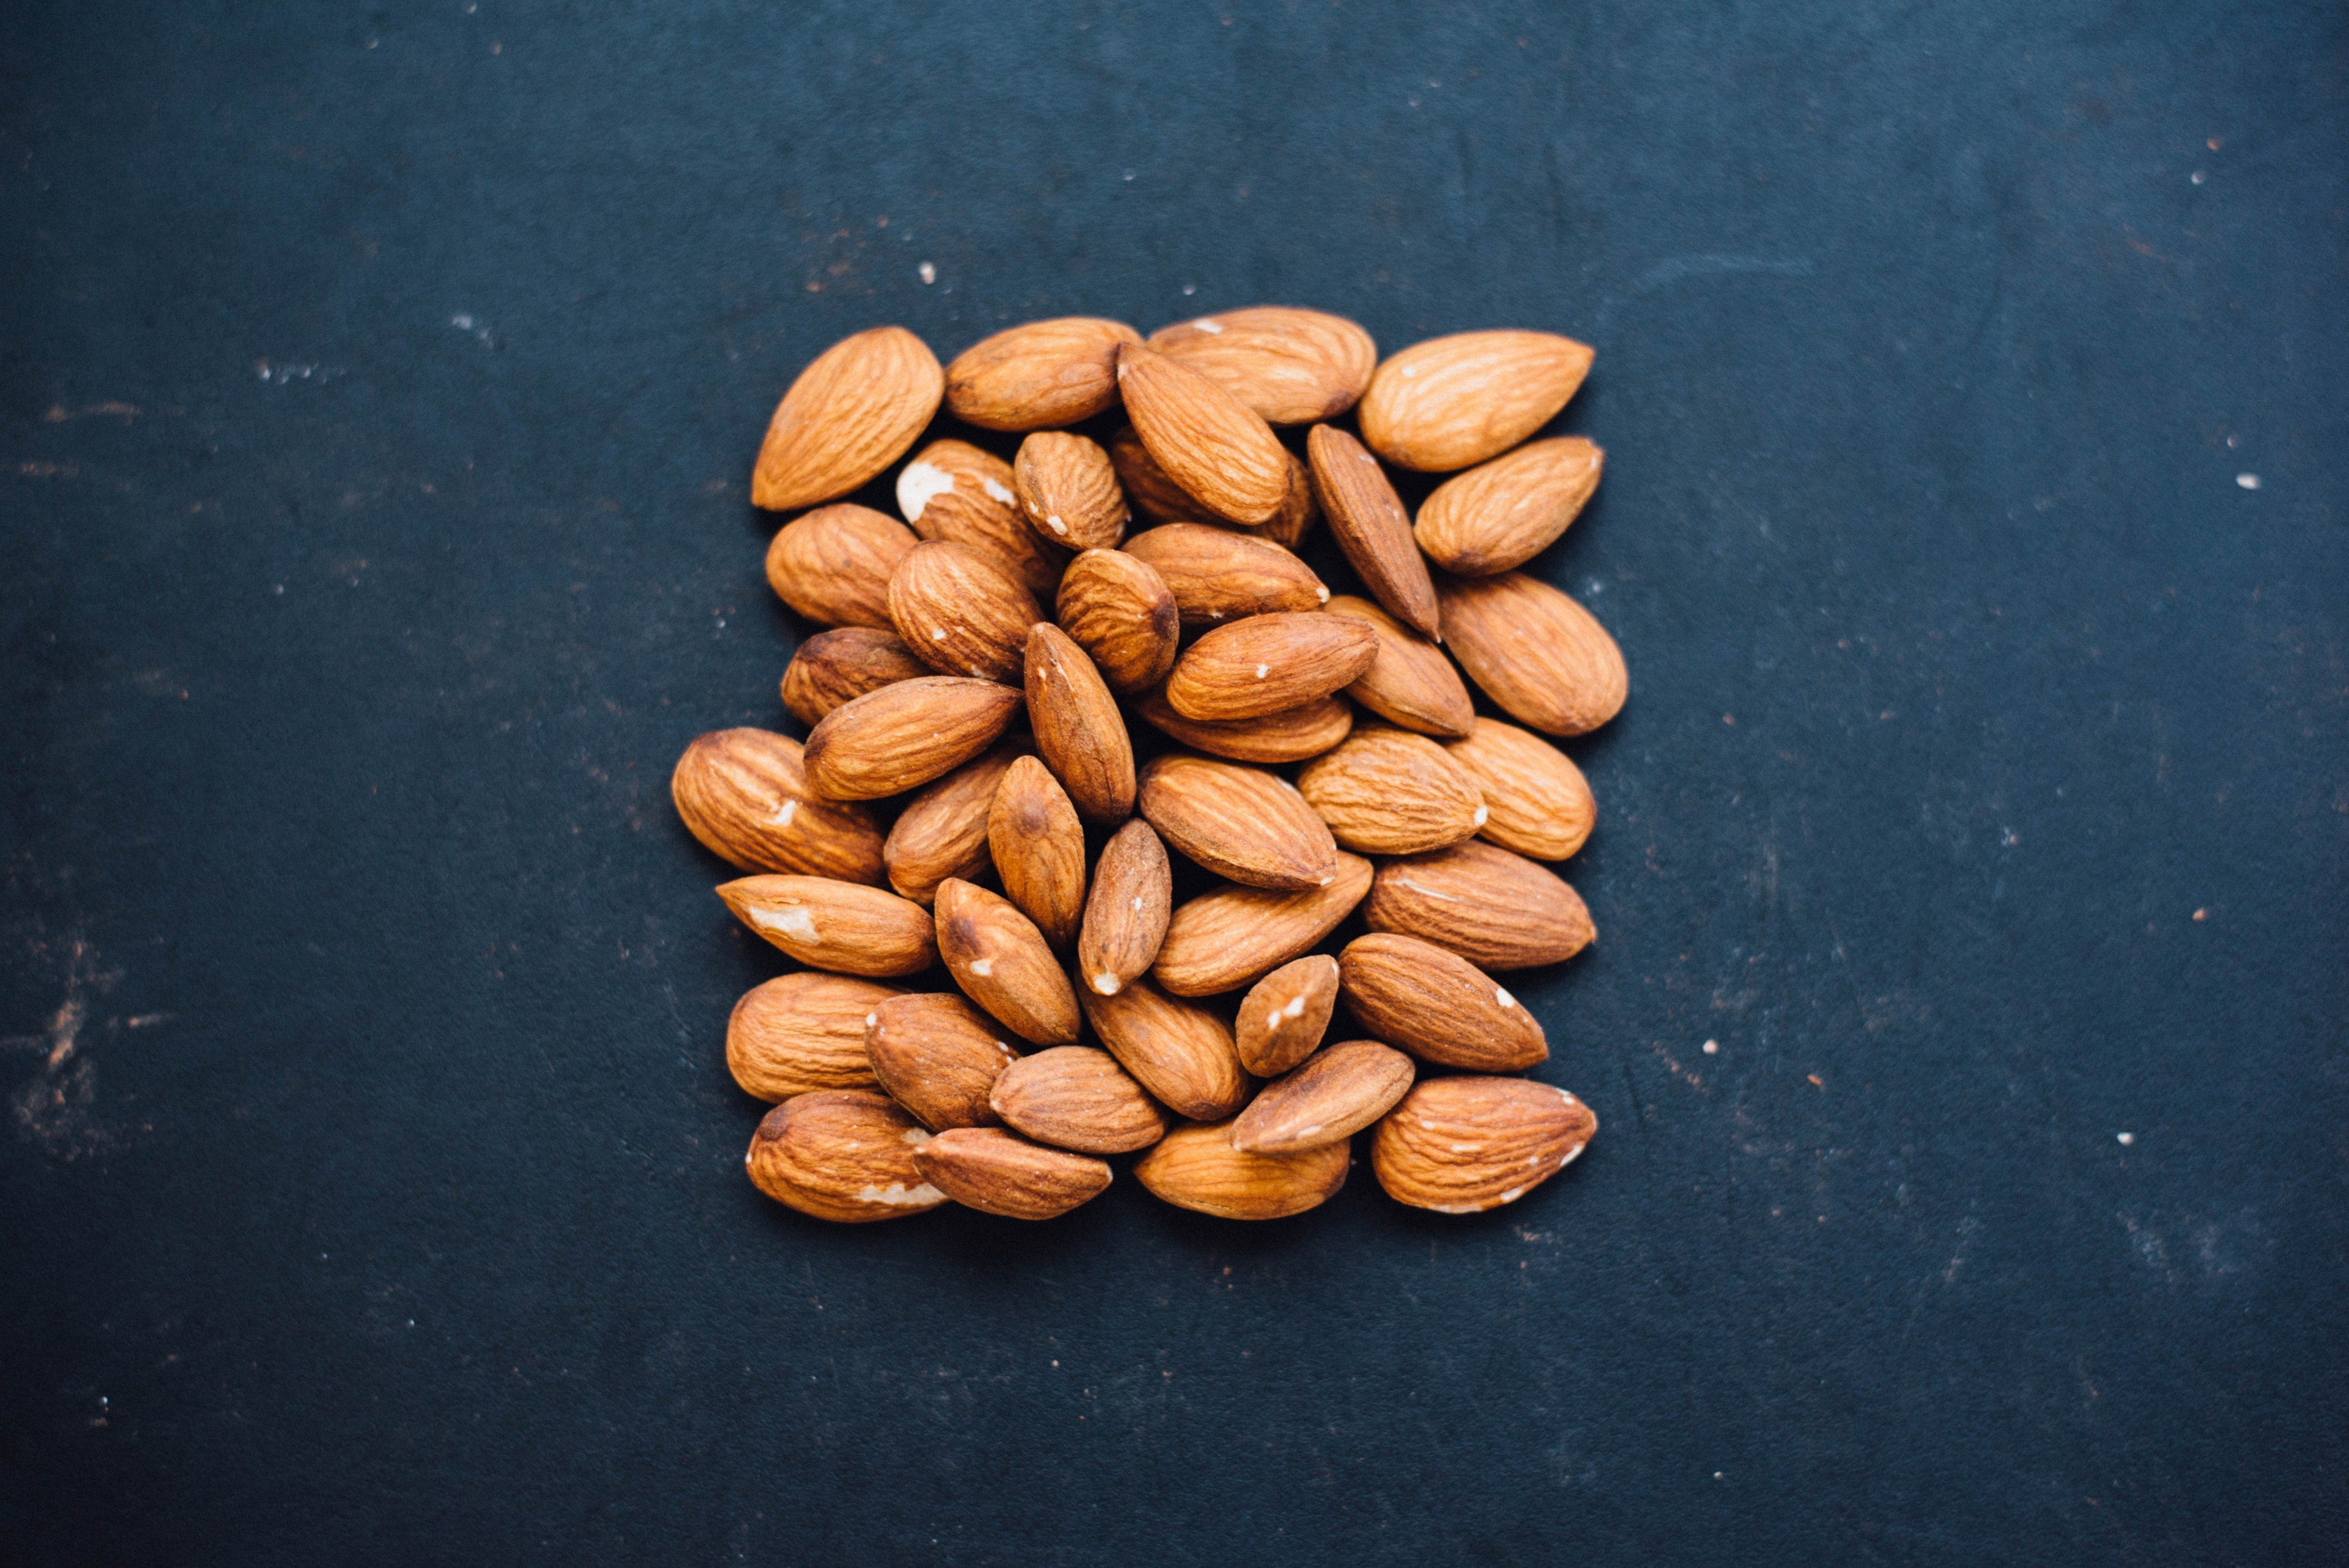 Wallpaper / nuts almonds table and black HD 4k wallpaper